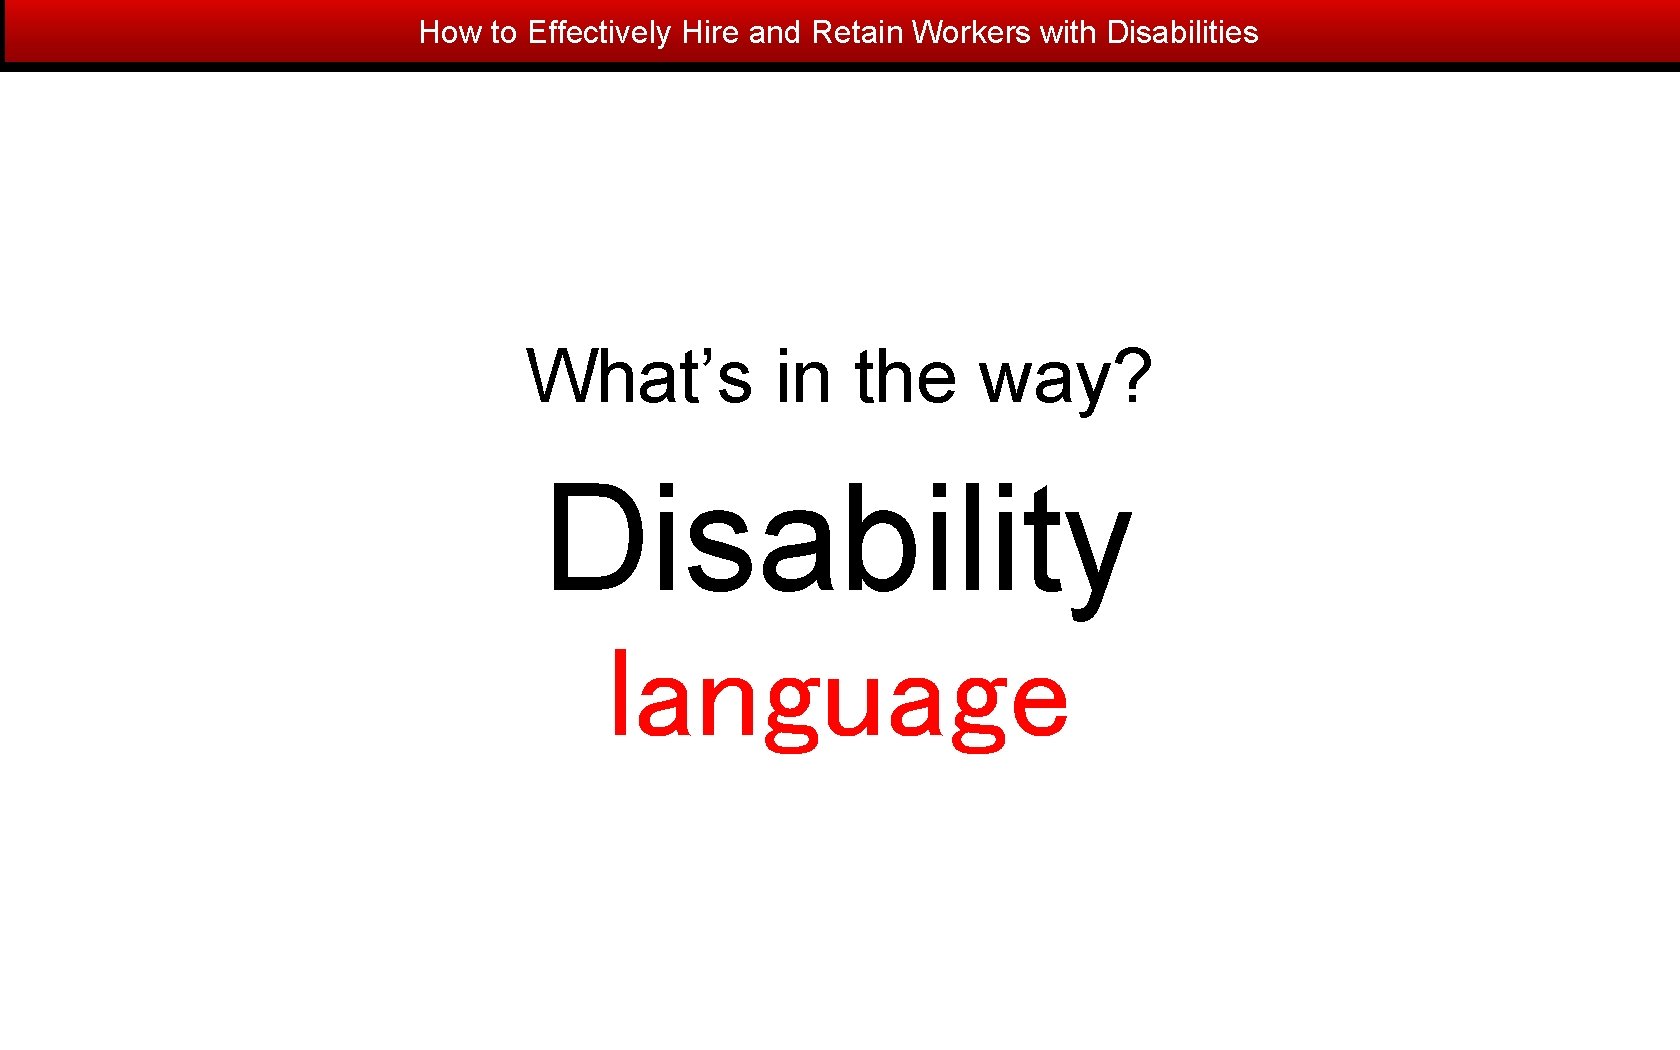 How to Effectively Hire and Retain Workers with Disabilities What’s in the way? Disability